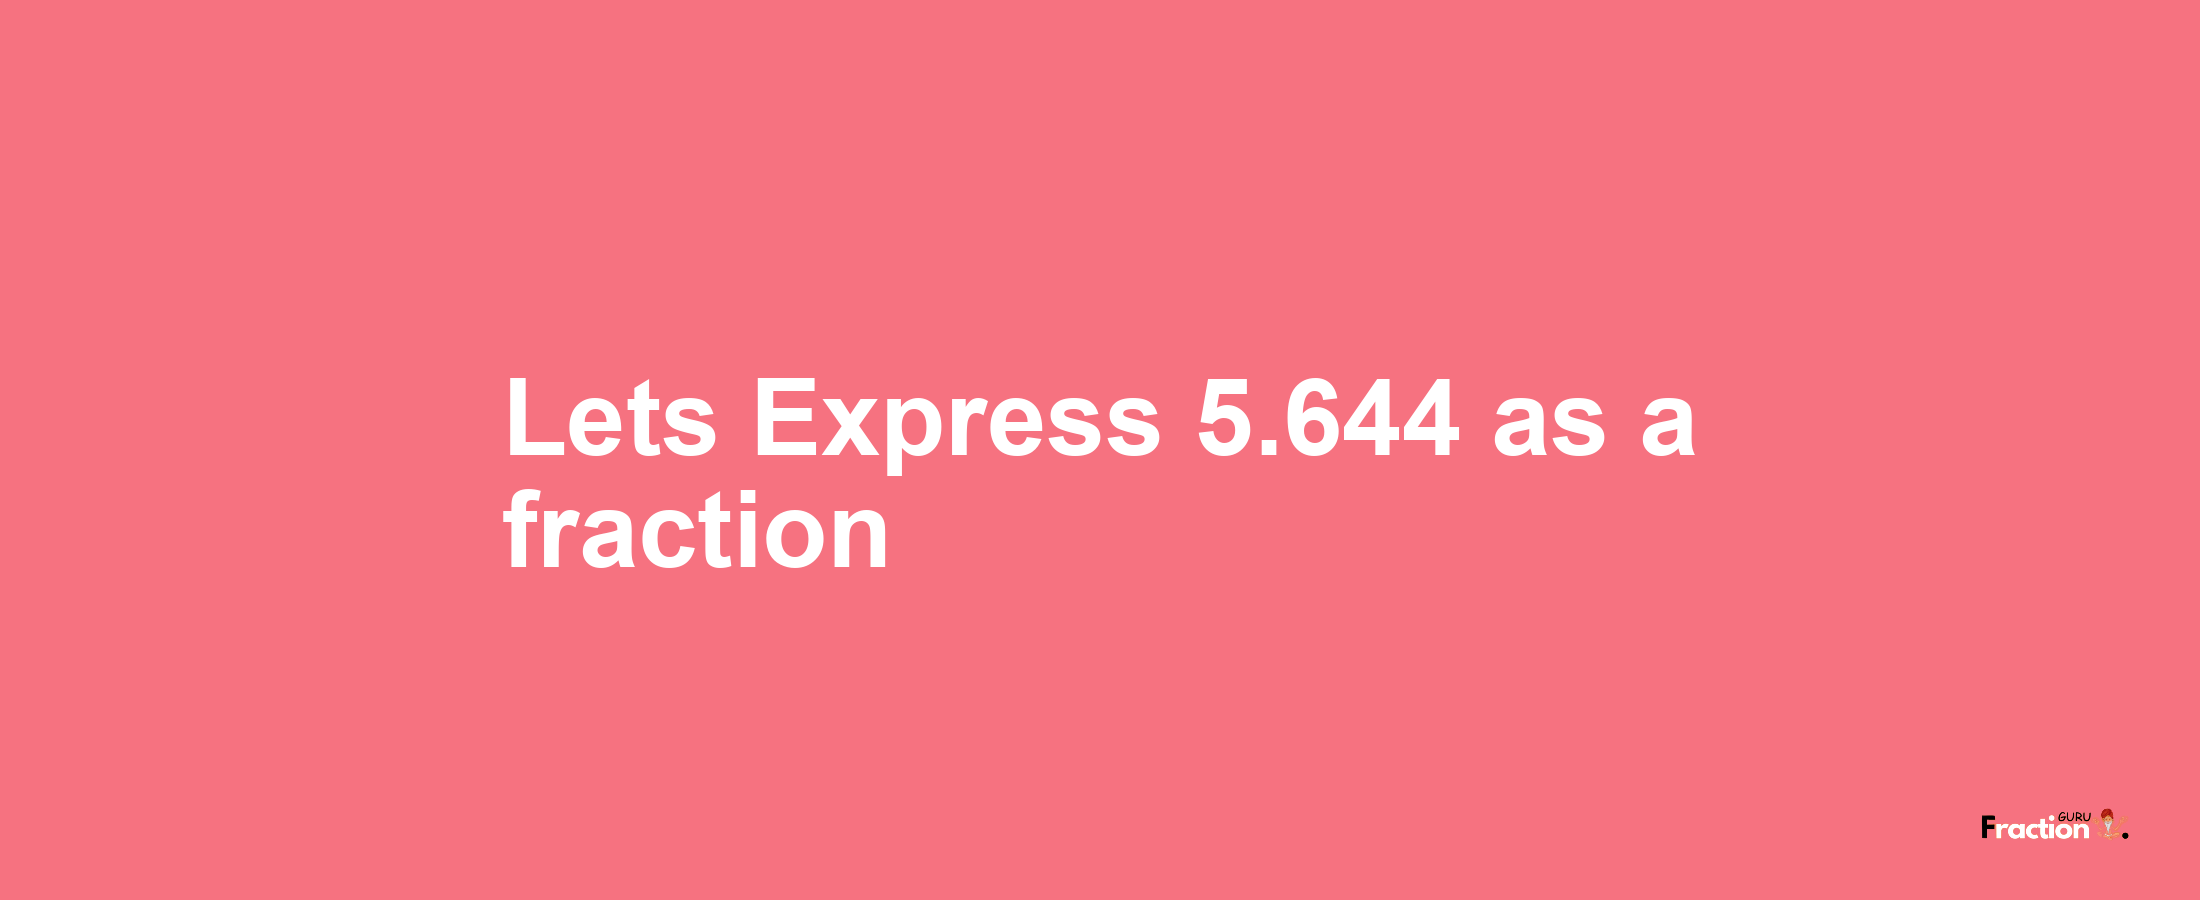 Lets Express 5.644 as afraction